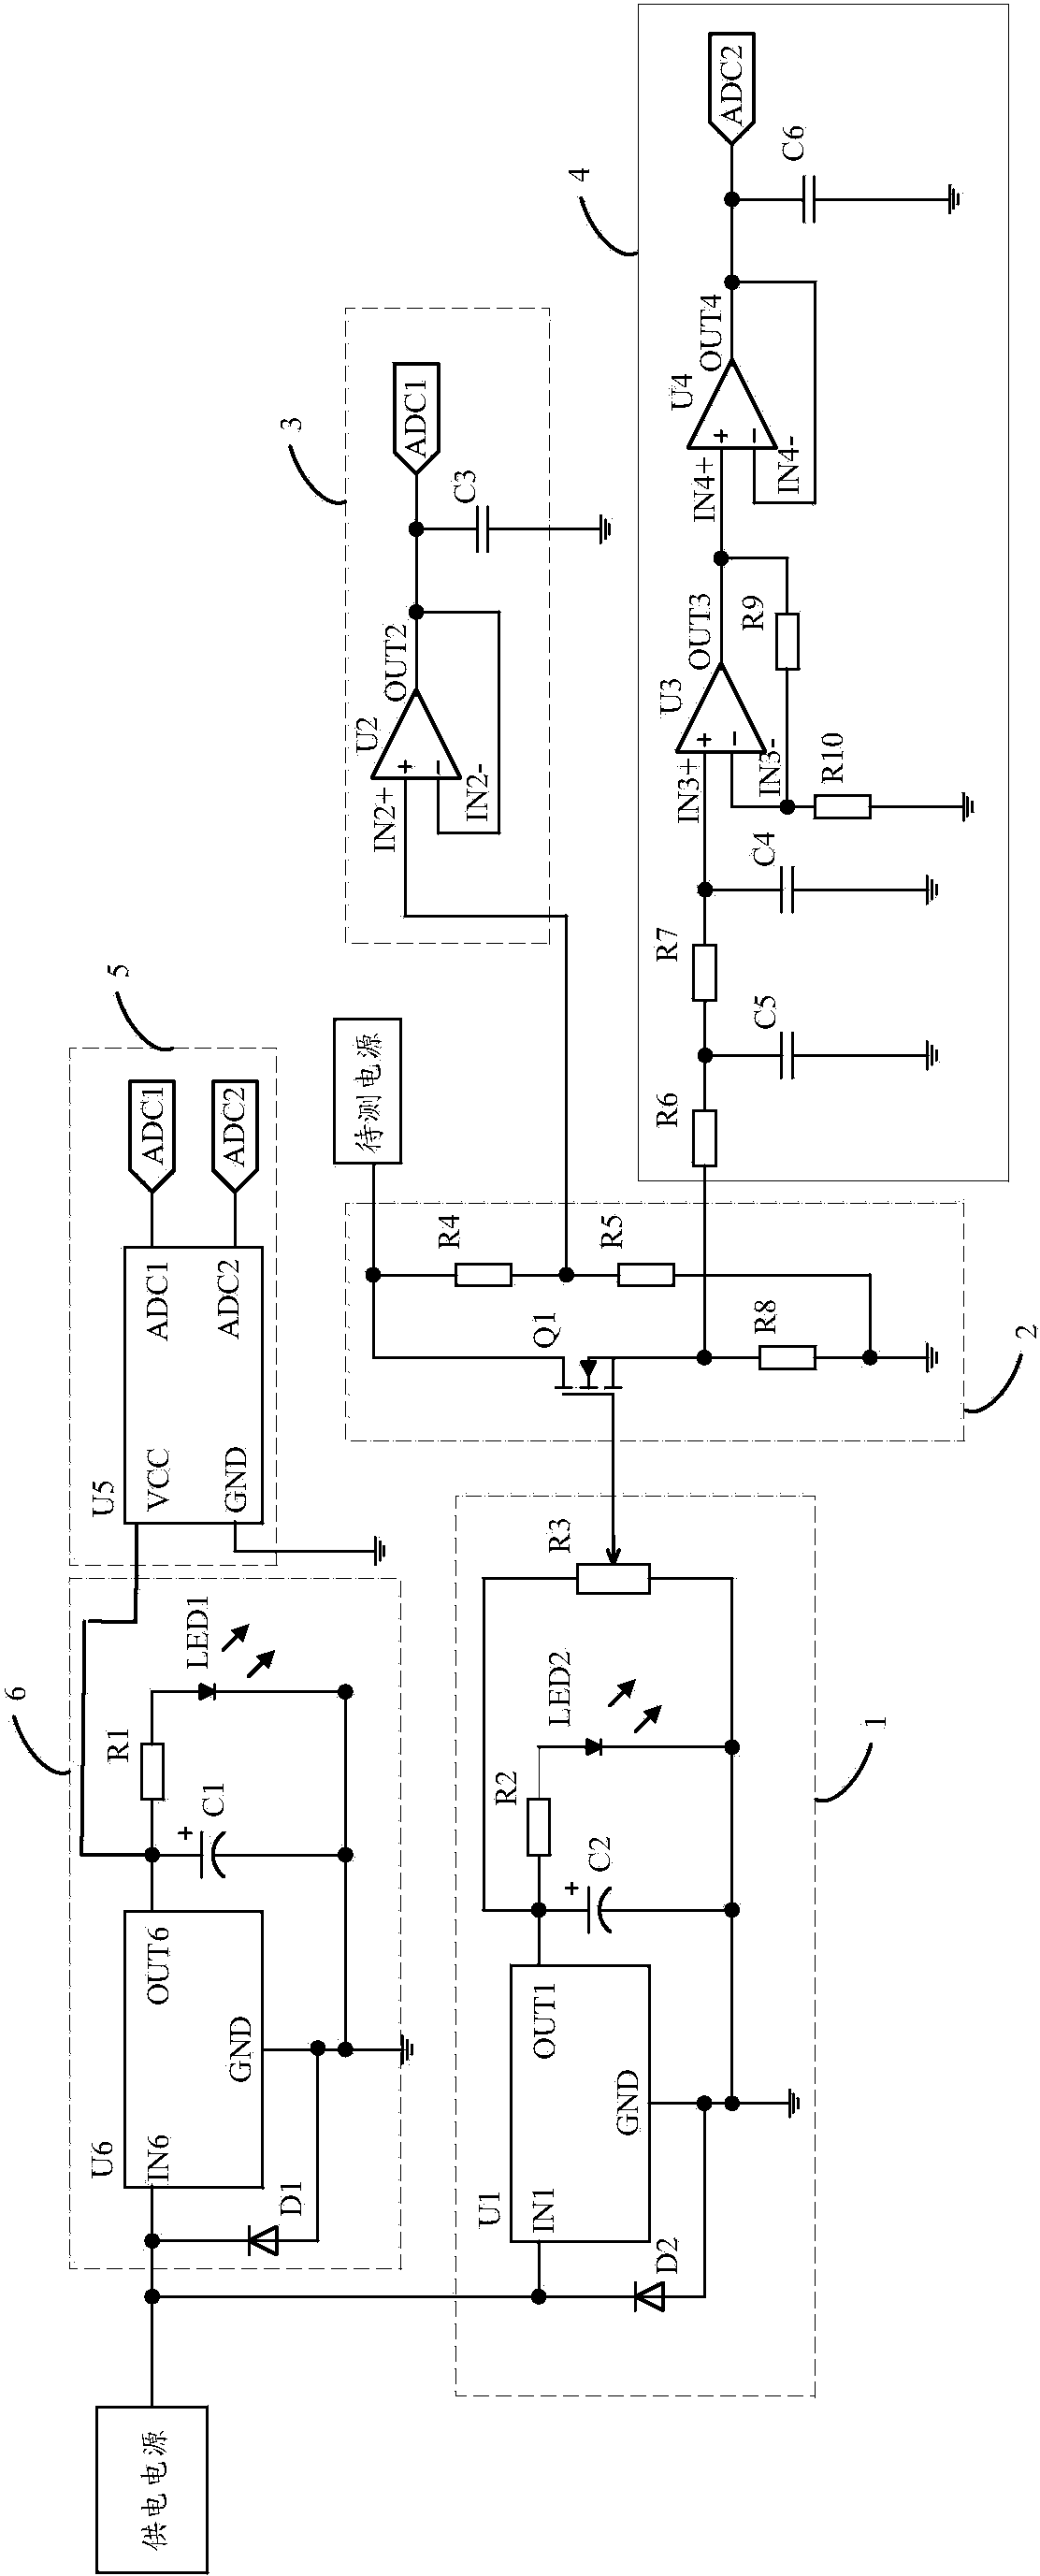 Load driving circuit and electronic load